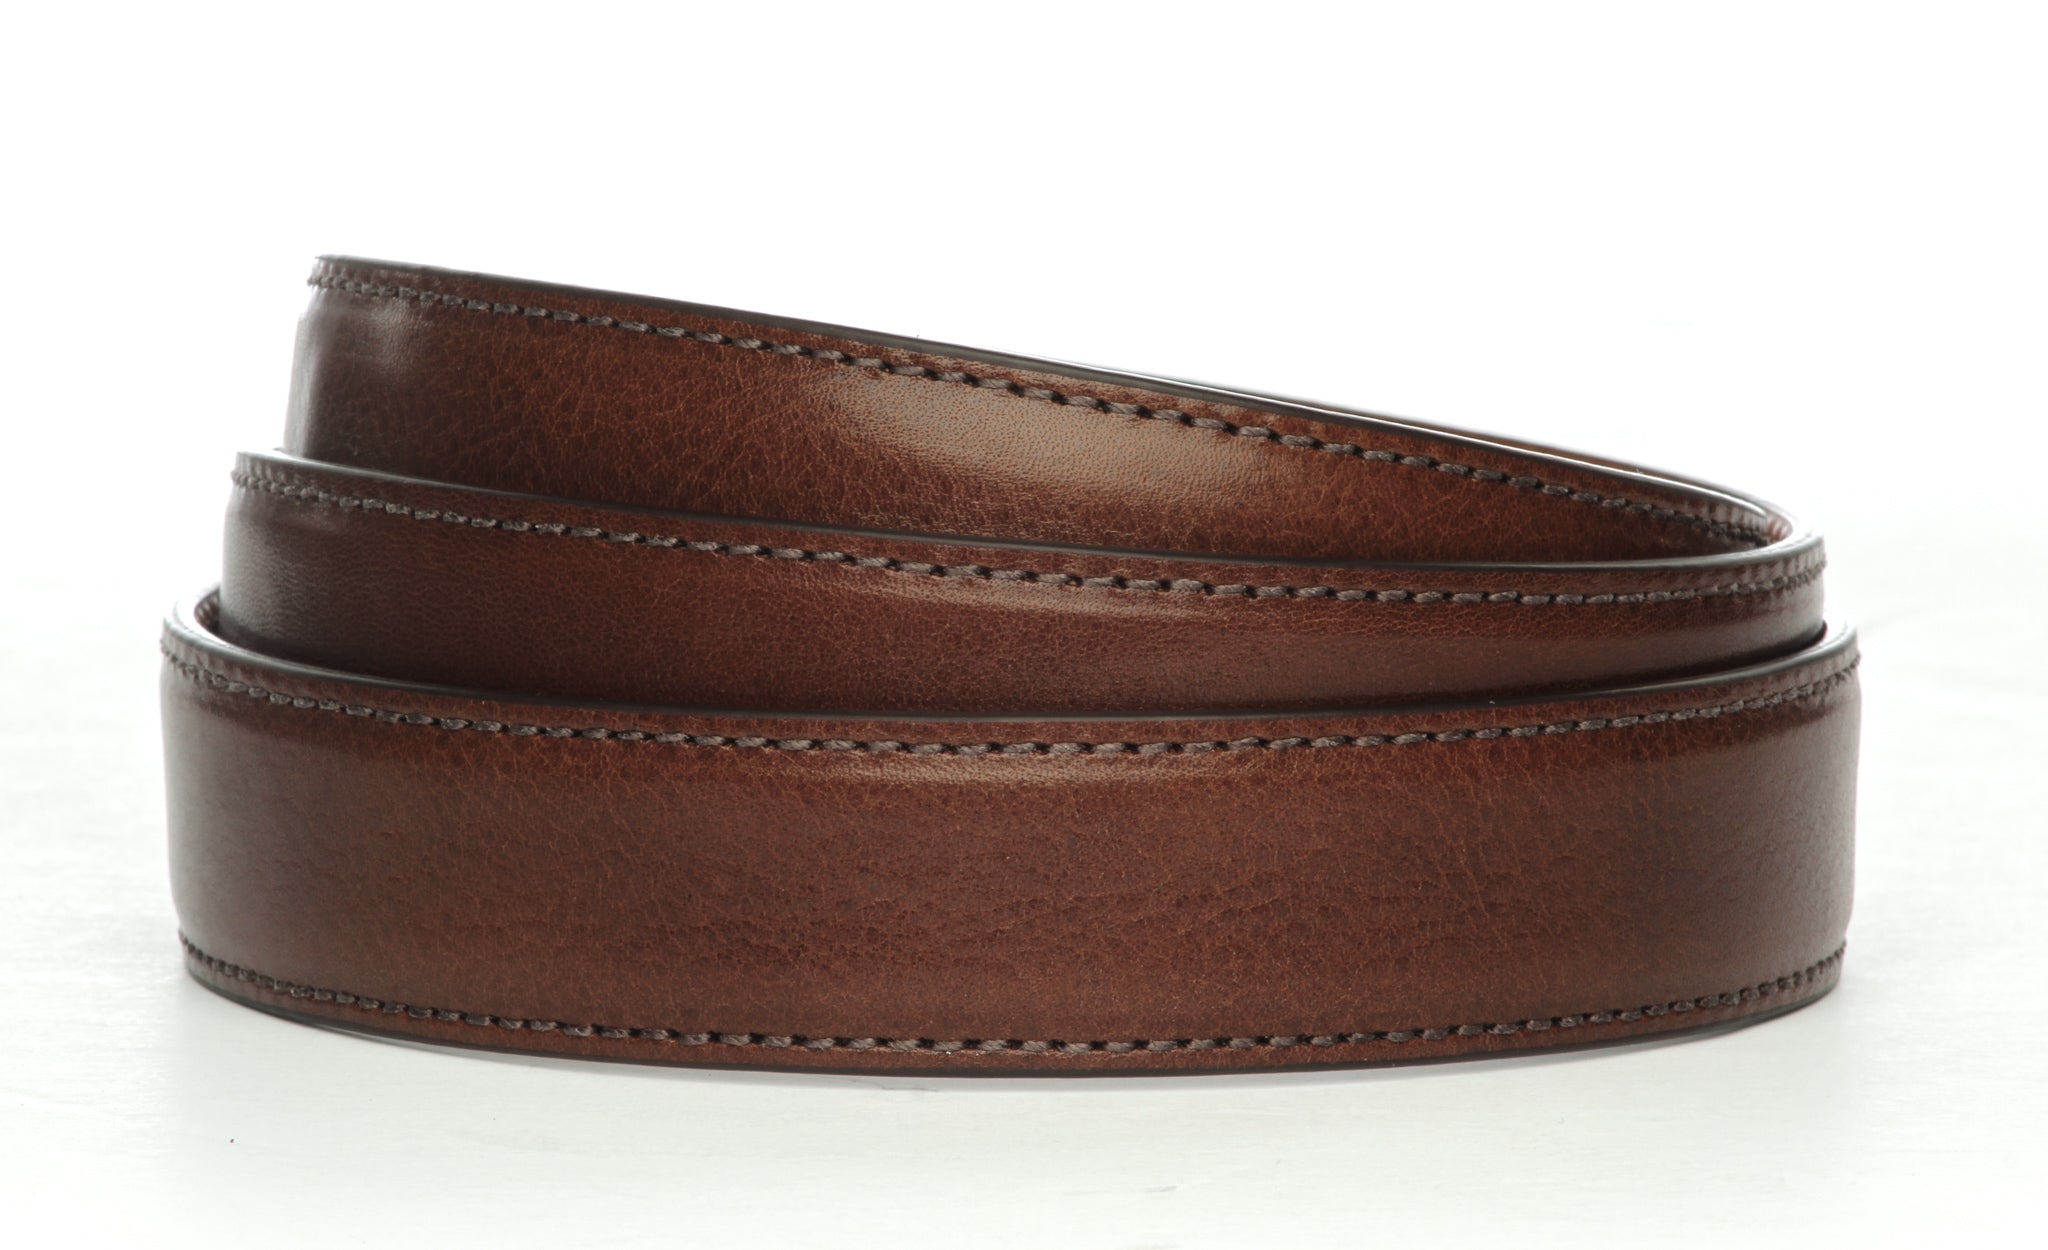 Calfskin Straps and Removable Buckles